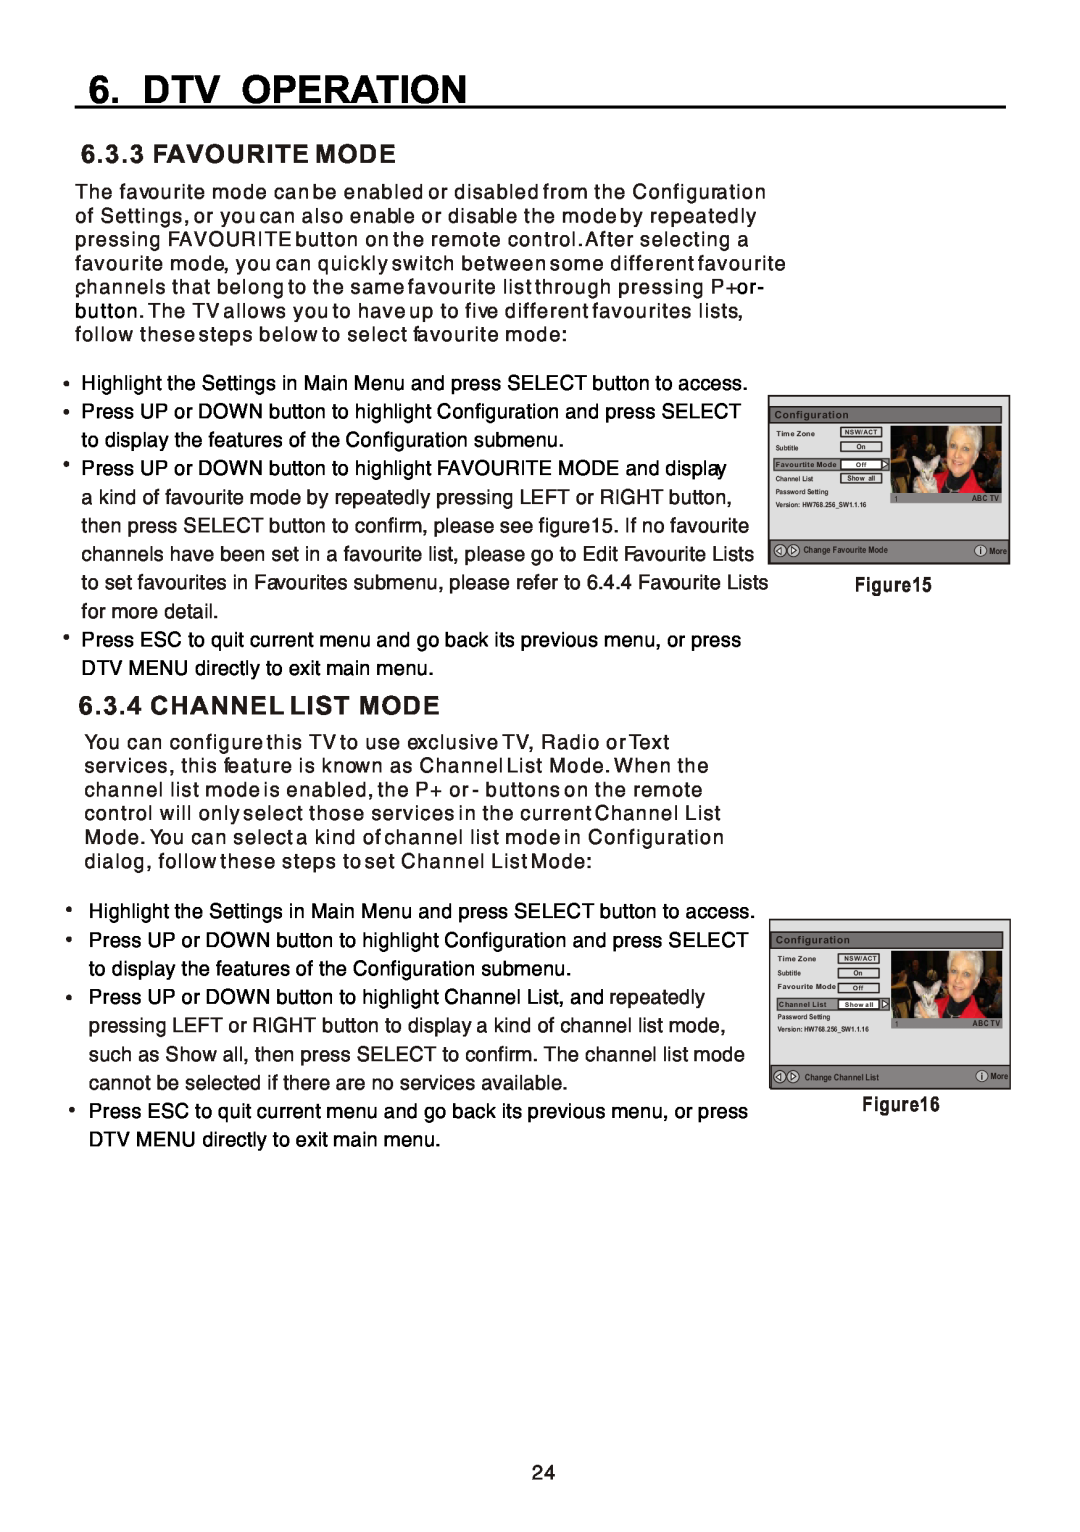 Teac CT-W32ID owner manual Favourite Mode, Channel List Mode, Dtv Operation 